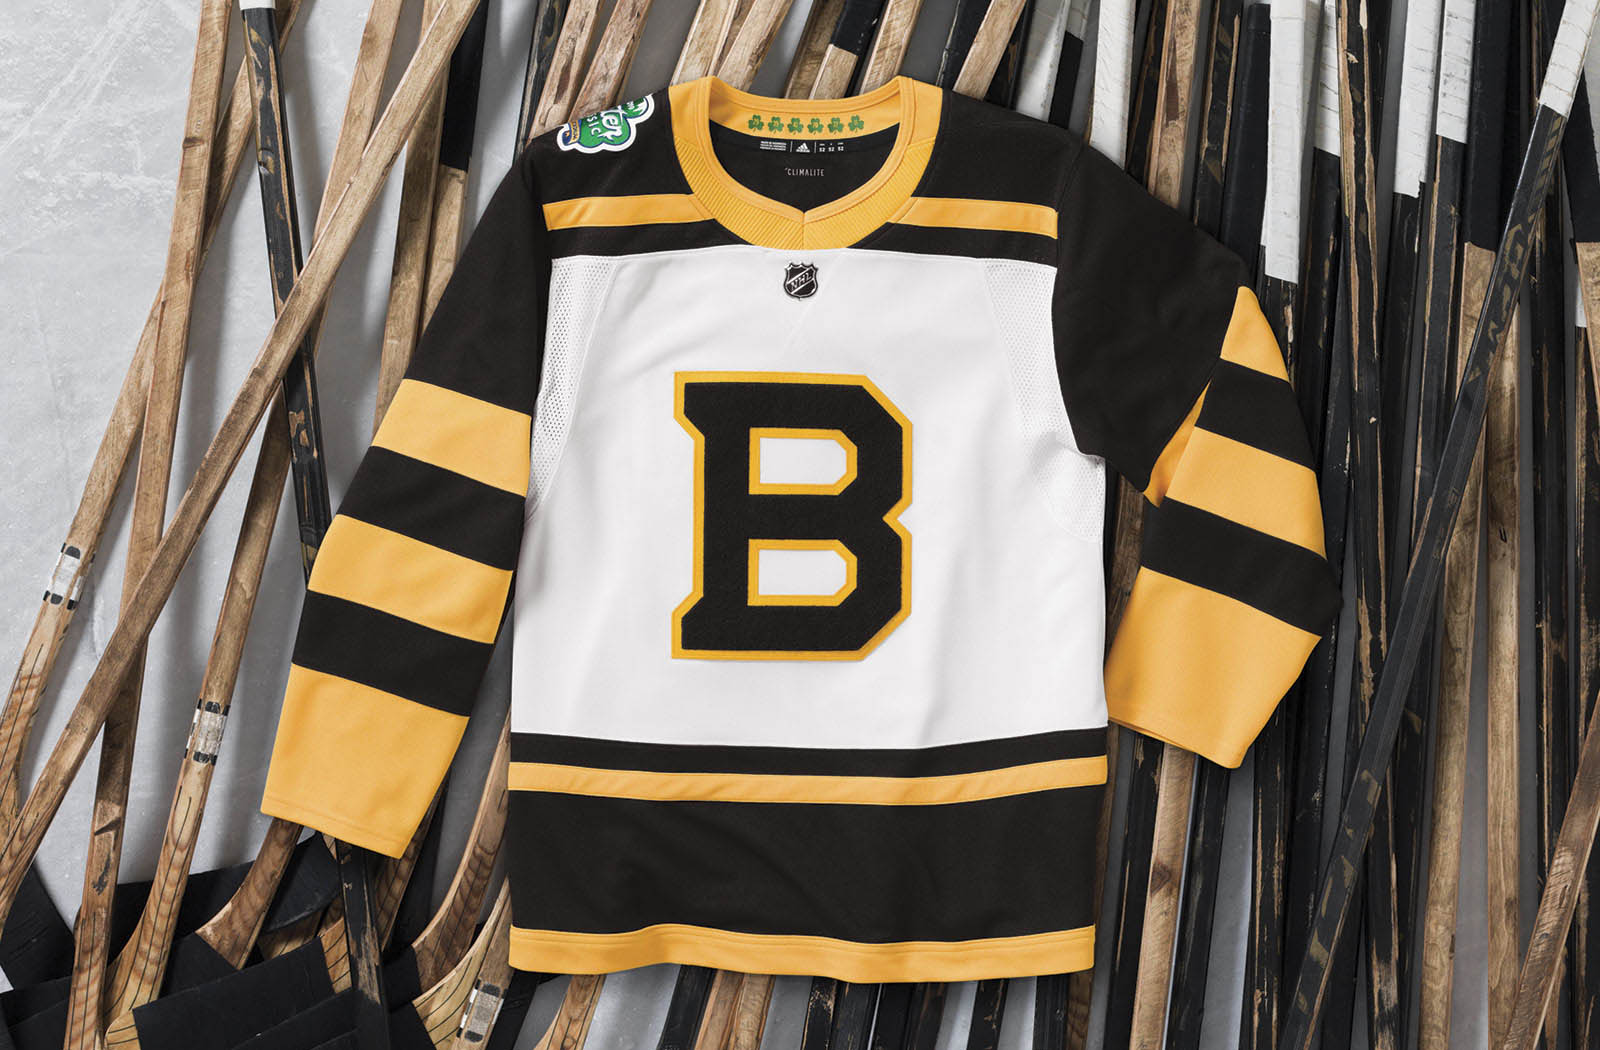 Bruins Winter Classic uniforms for 2019